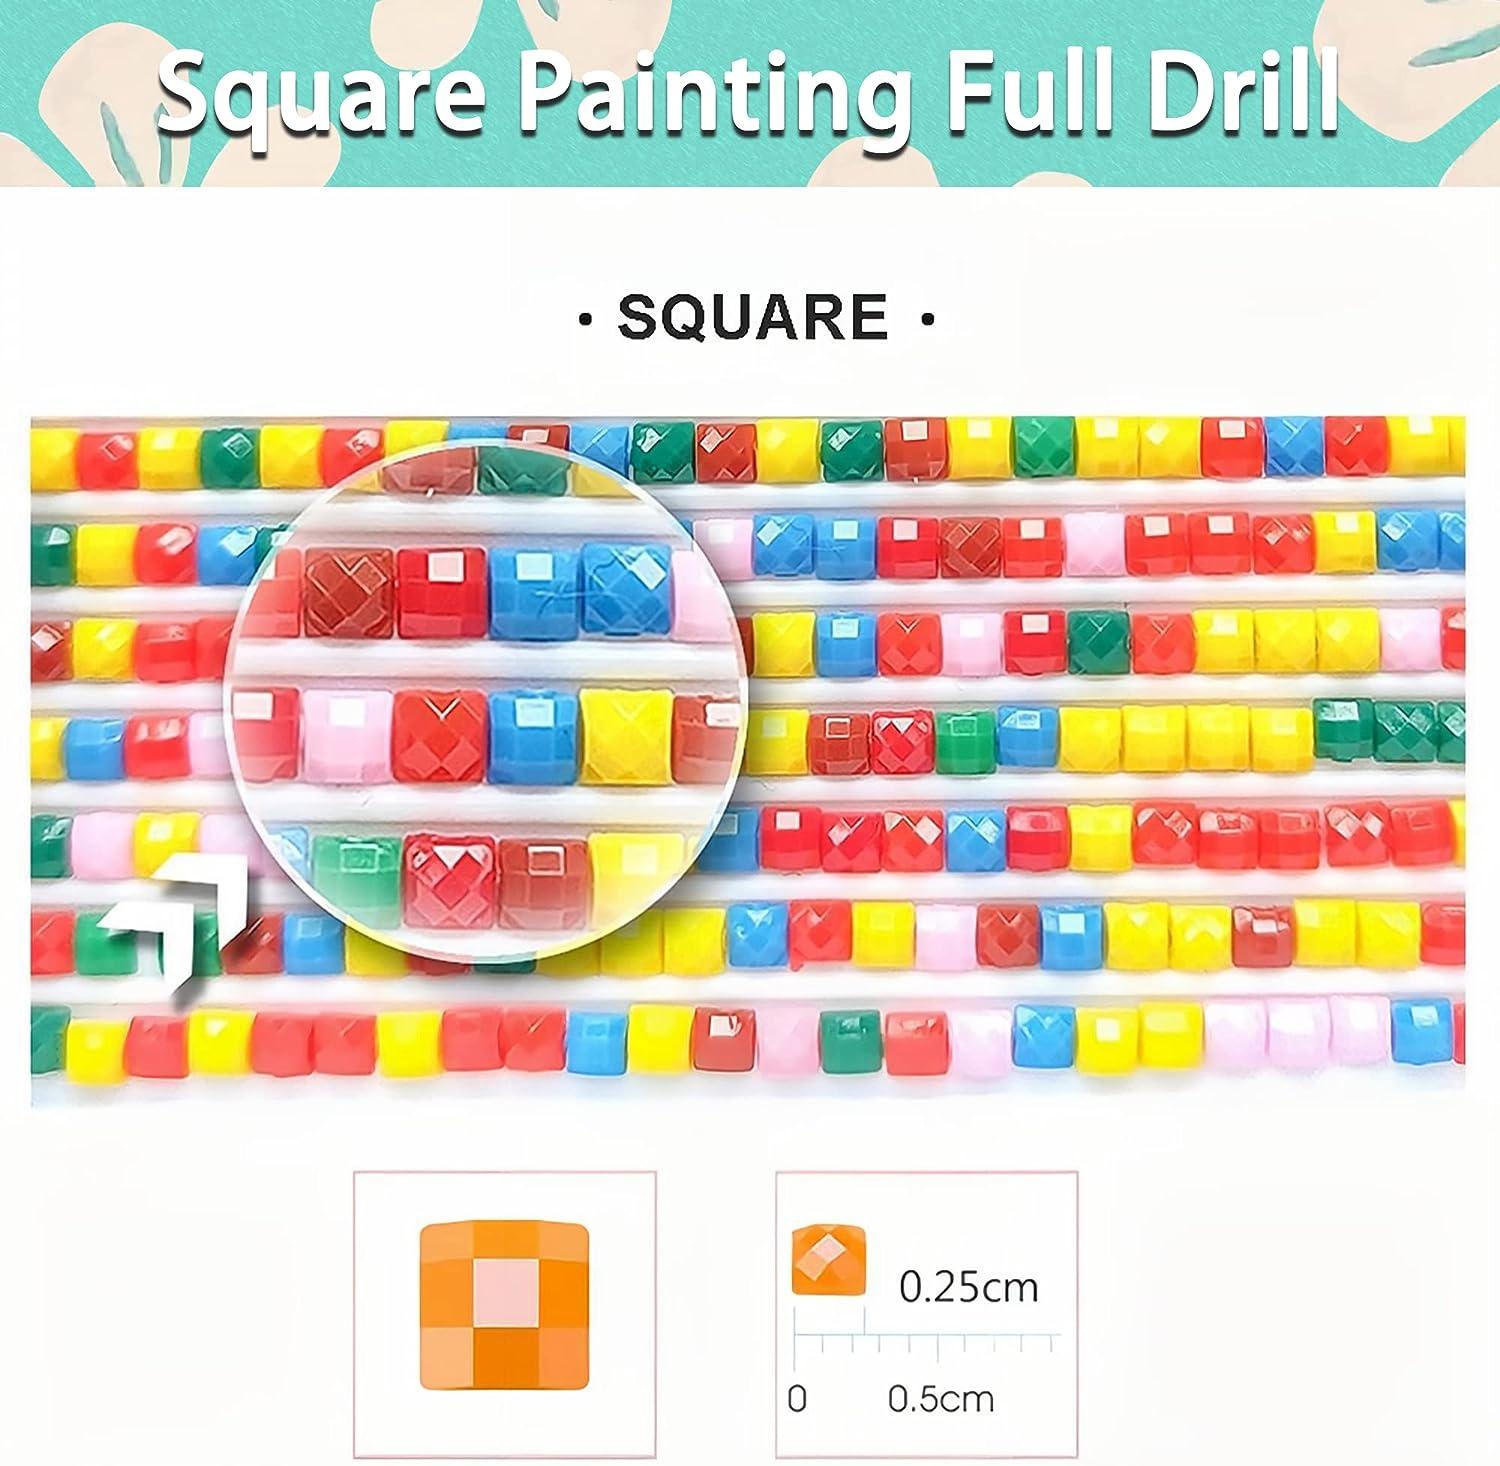 Diamond Painting Kits for Adults, DIY 5D Square Full Drill Art Perfect for Relaxation and Home Wall Decor